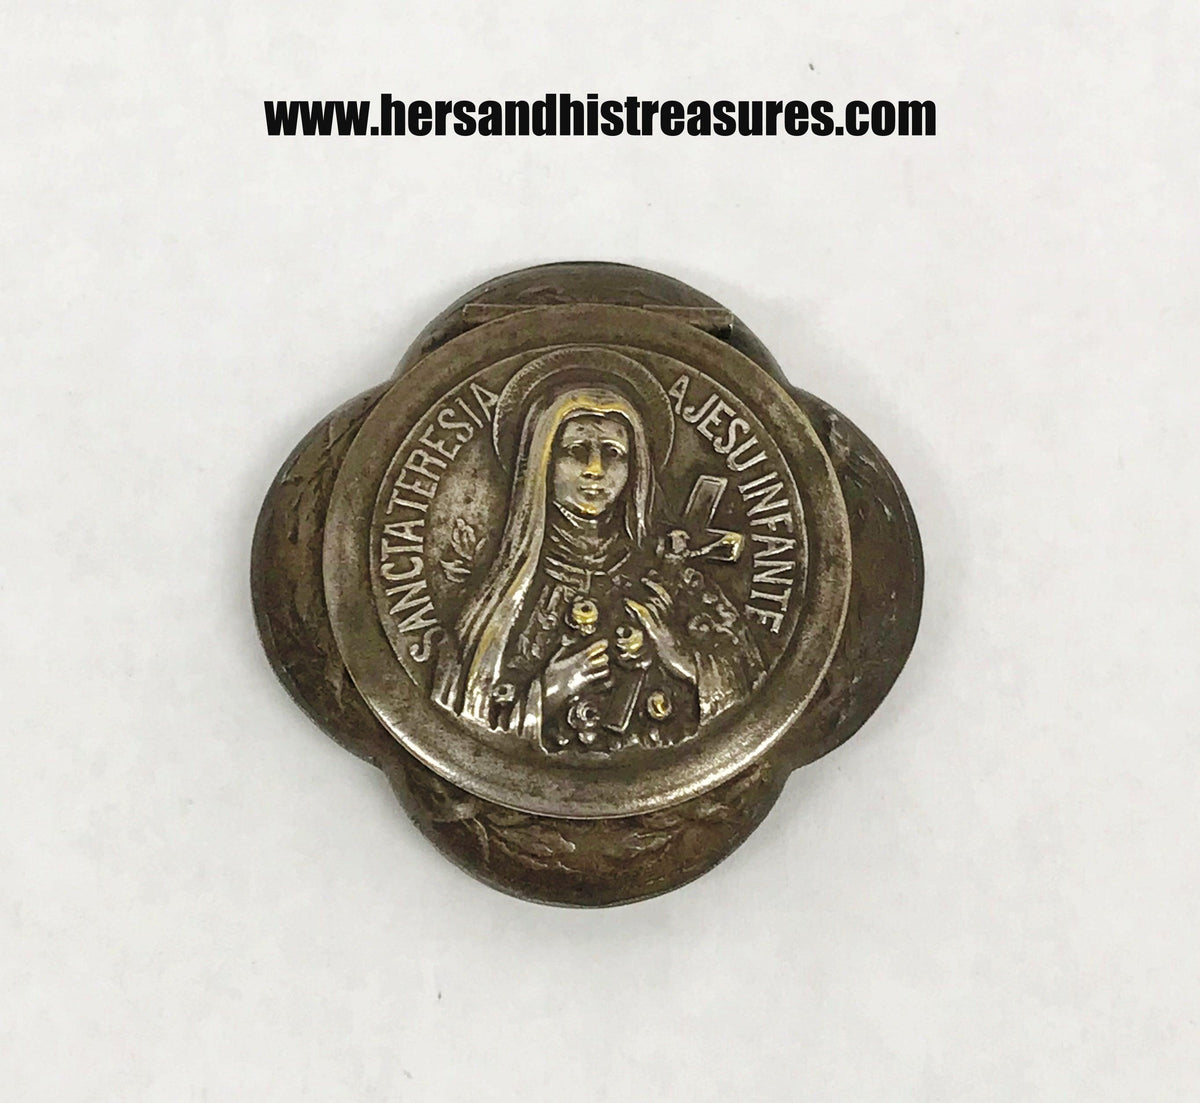 Vintage Saint Theresa A Jesu Infante Metal Rosary Box Case With Mirror - Hers and His Treasures